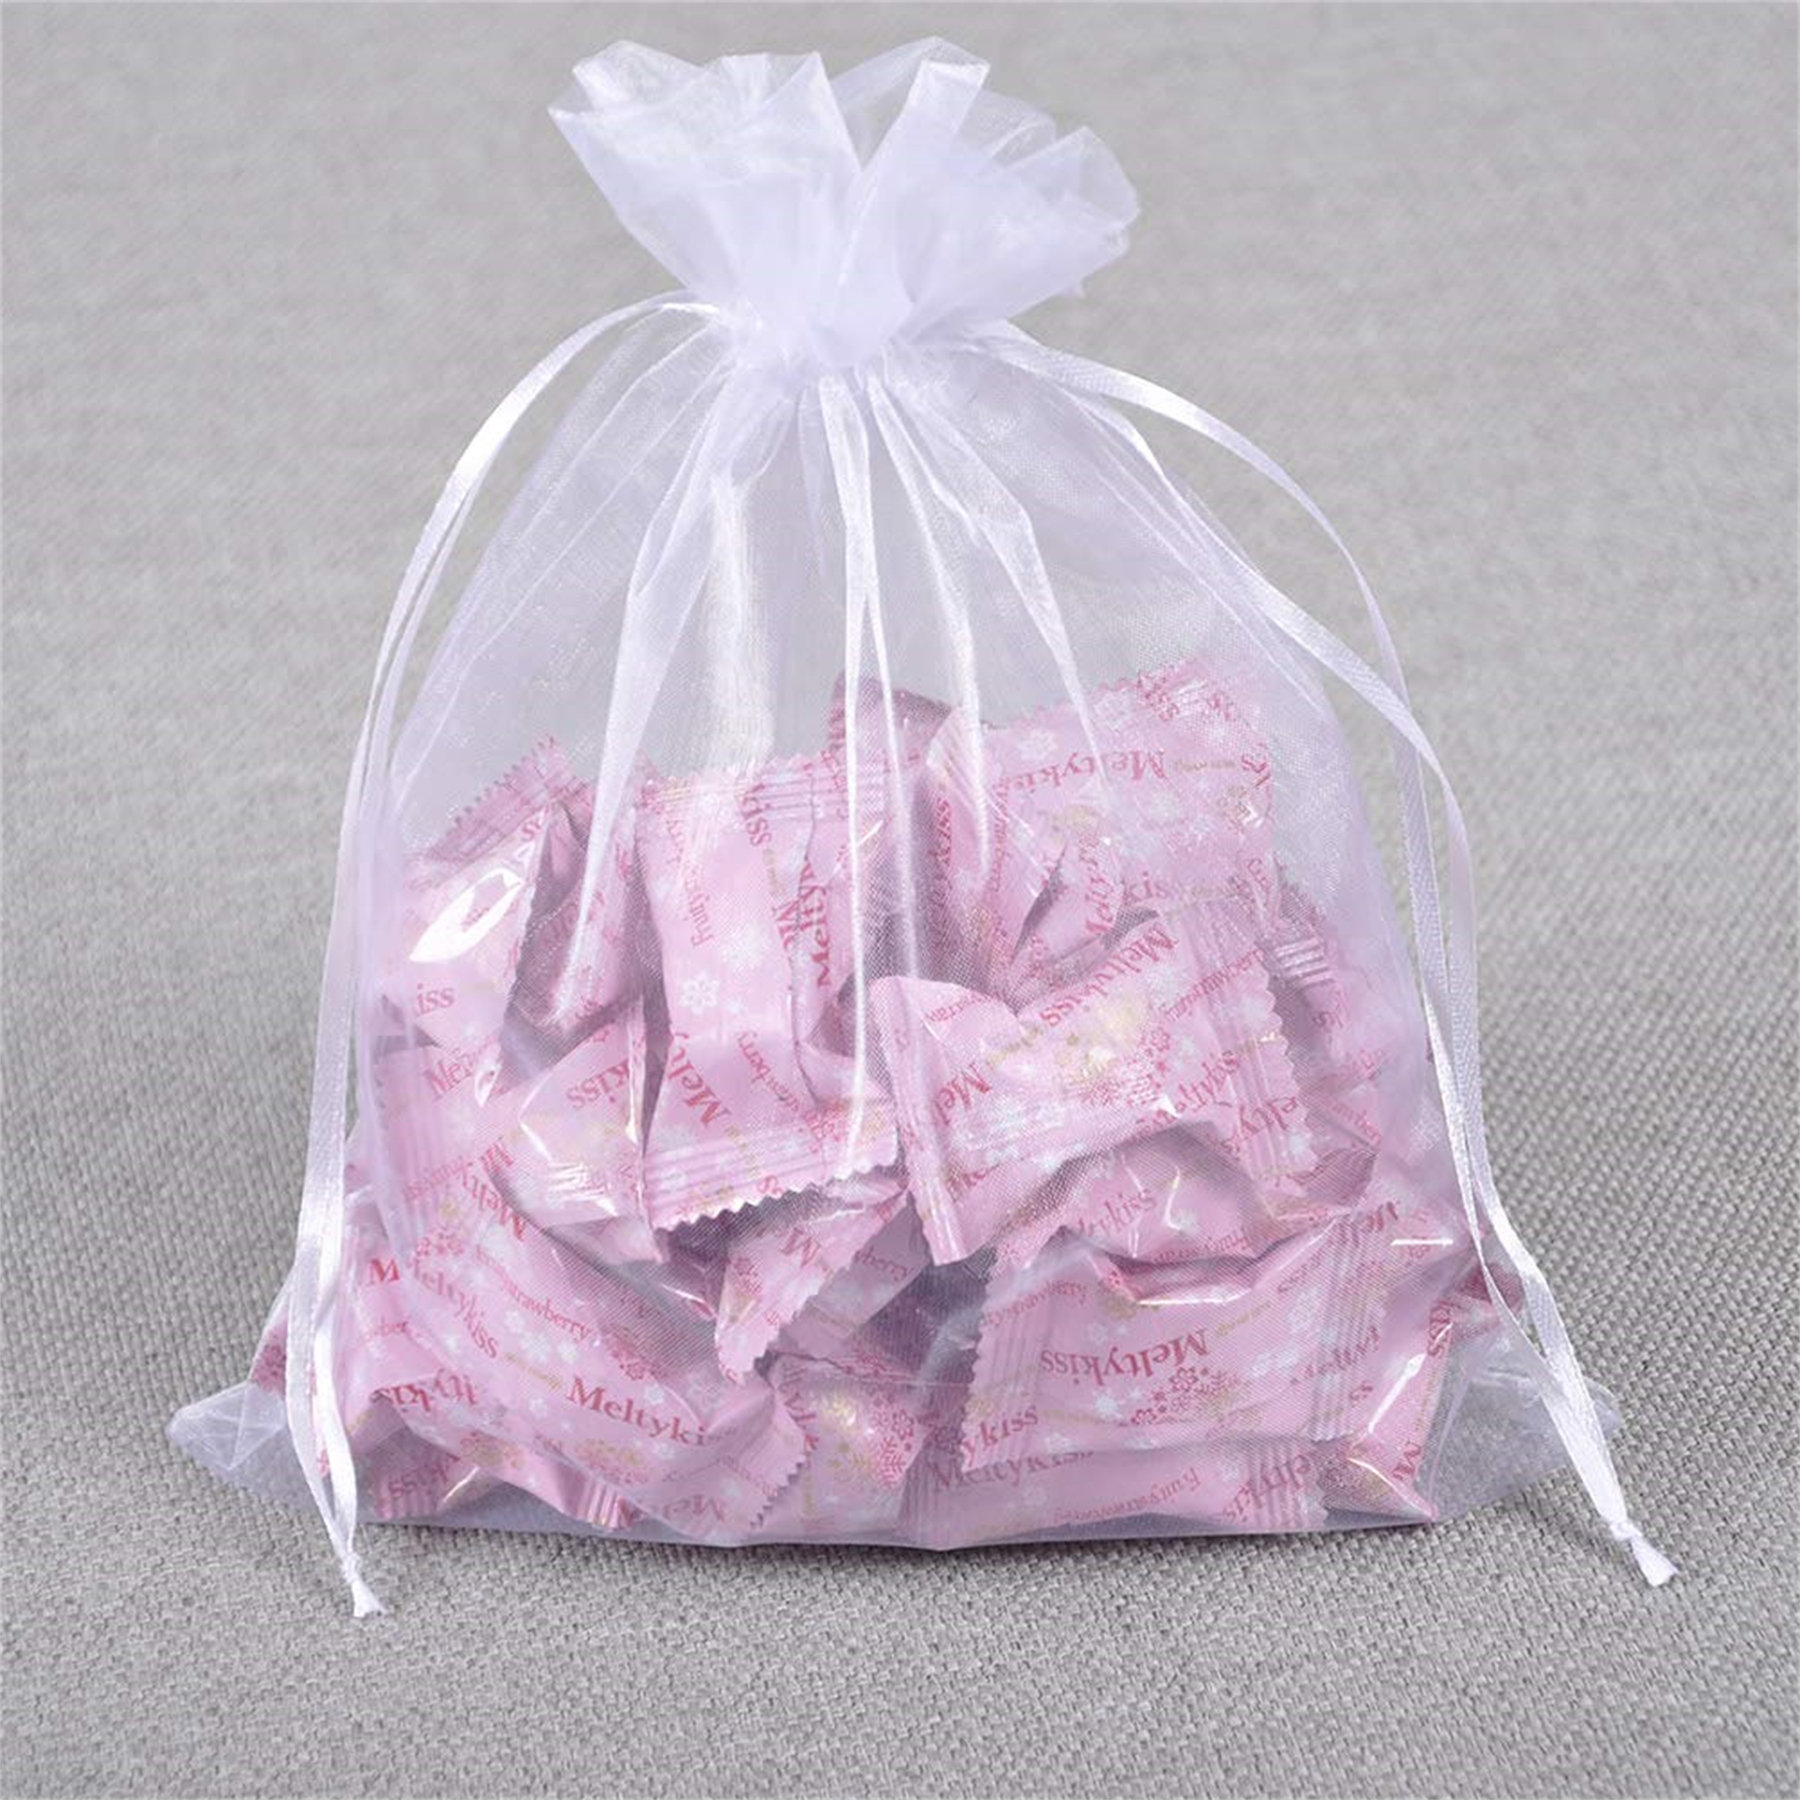 5x8" Organza Bag-30/pk Wedding Party Favor Gift Candy Pouch. PREMIUM QUALITY 